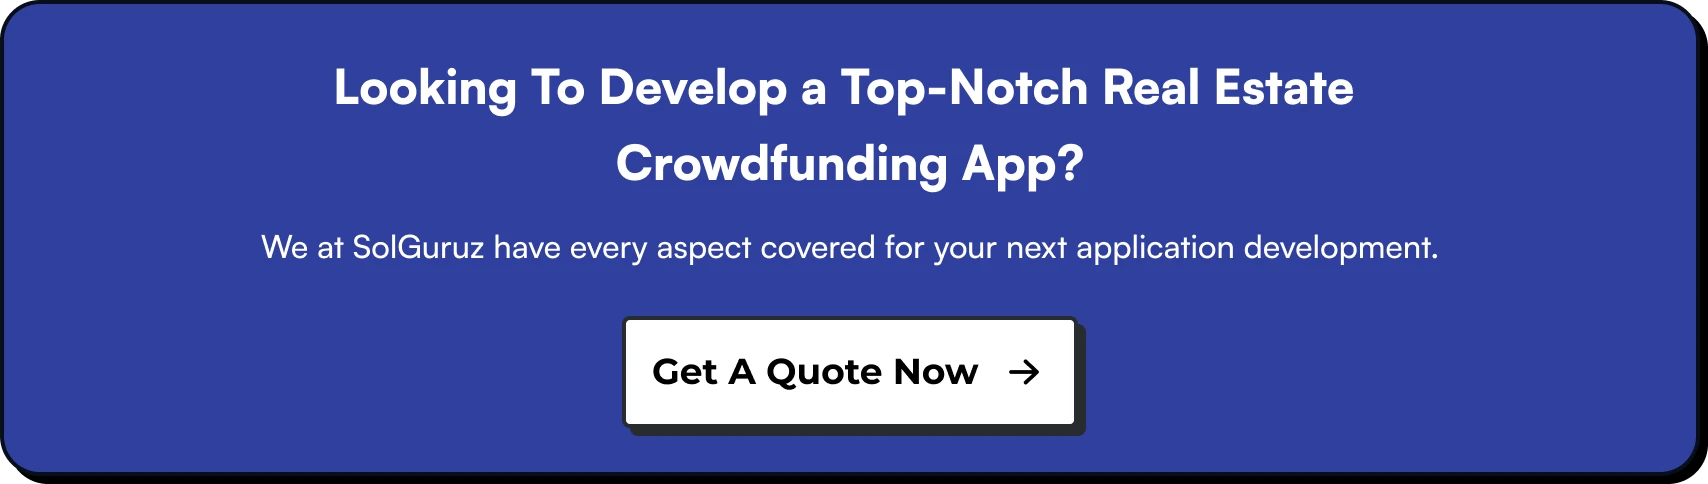 Looking To Develop a Top-Notch Real Estate Crowdfunding App? We at SolGuruz have every aspect covered for your next application development